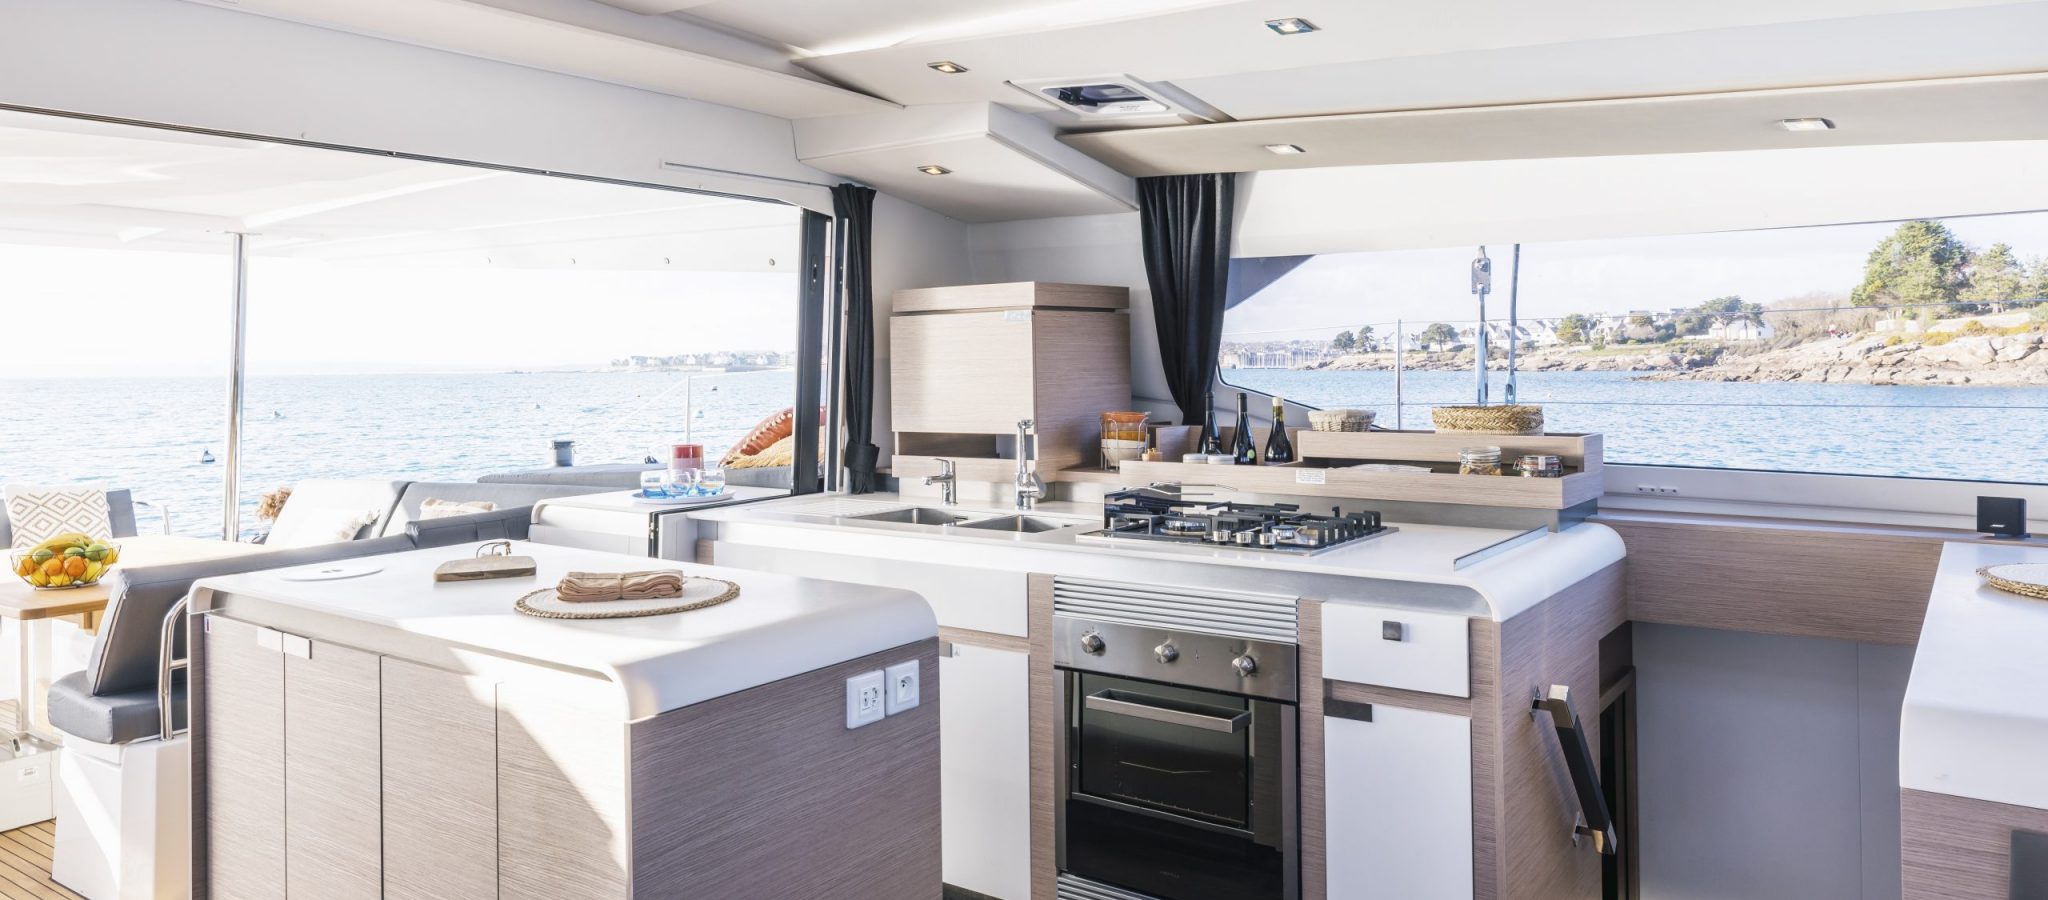 Fountaine Pajot shipyard, the new Fountaine Pajot 51, south Brittany on march 7, 2022, photo © Jean-Marie LIOT - www.jmliot.com